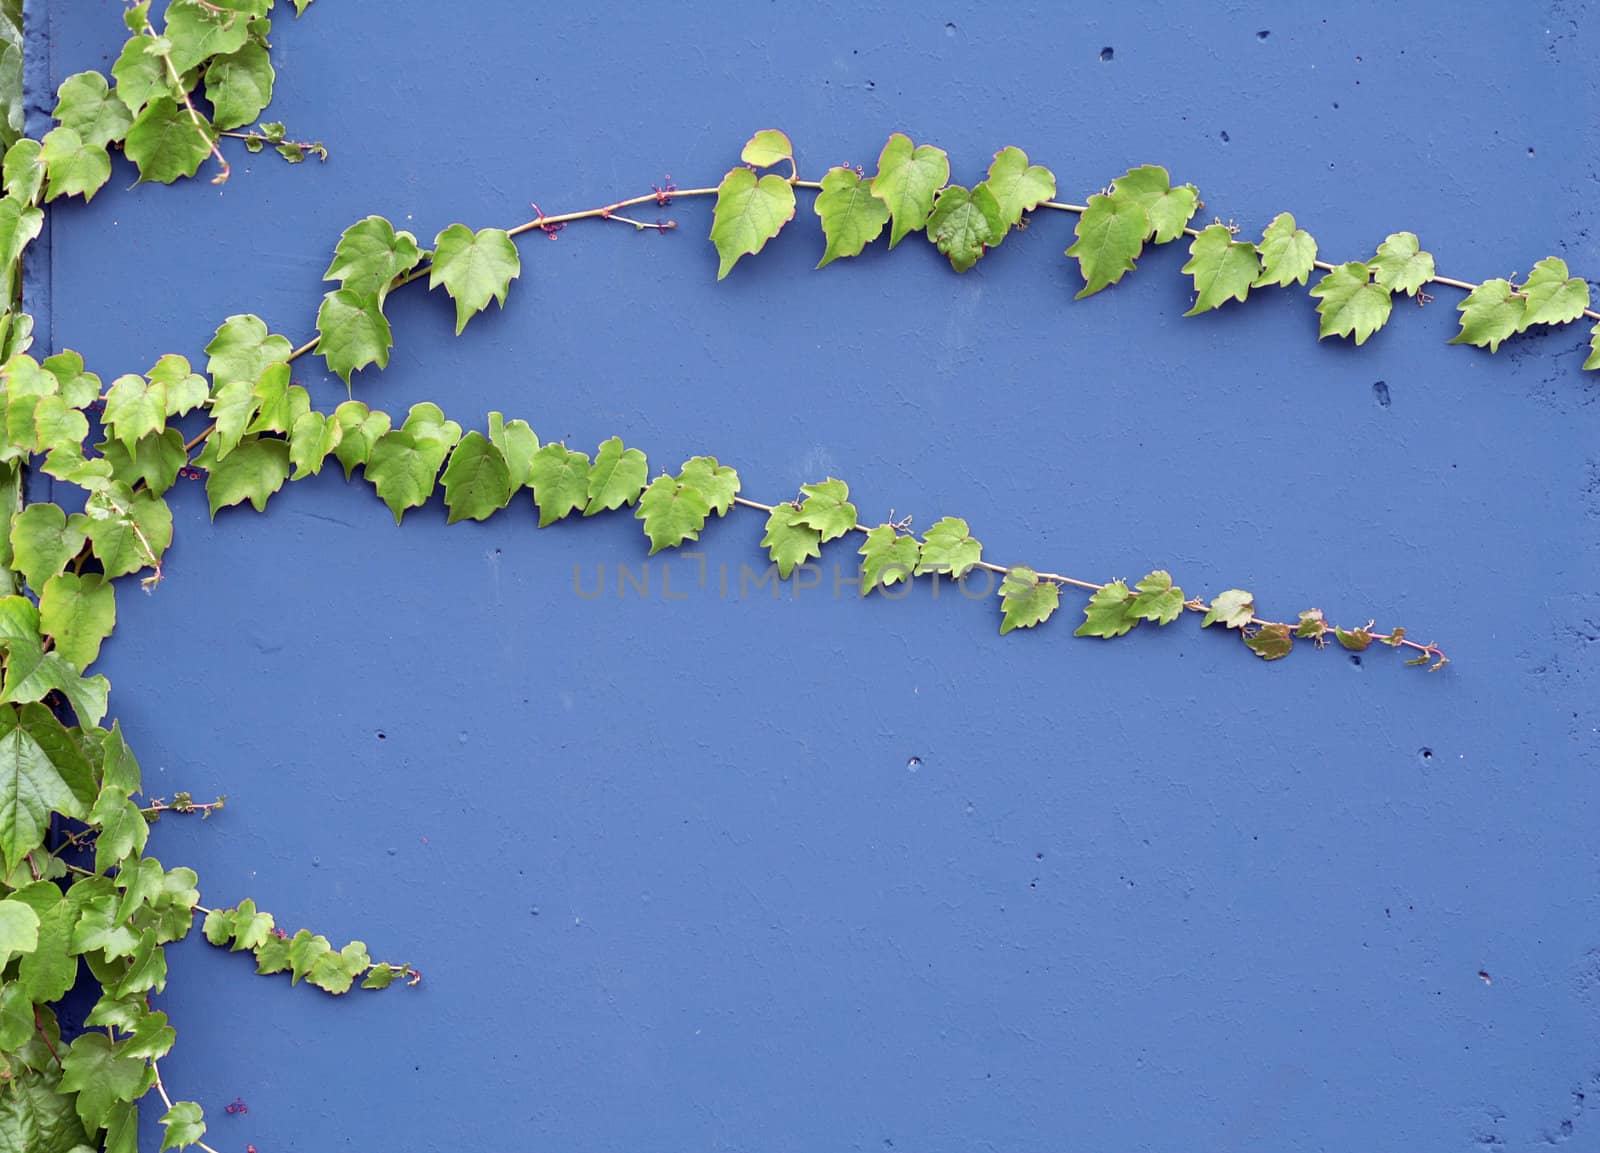 Ivy clinging on a blue painted wall. Copy space.